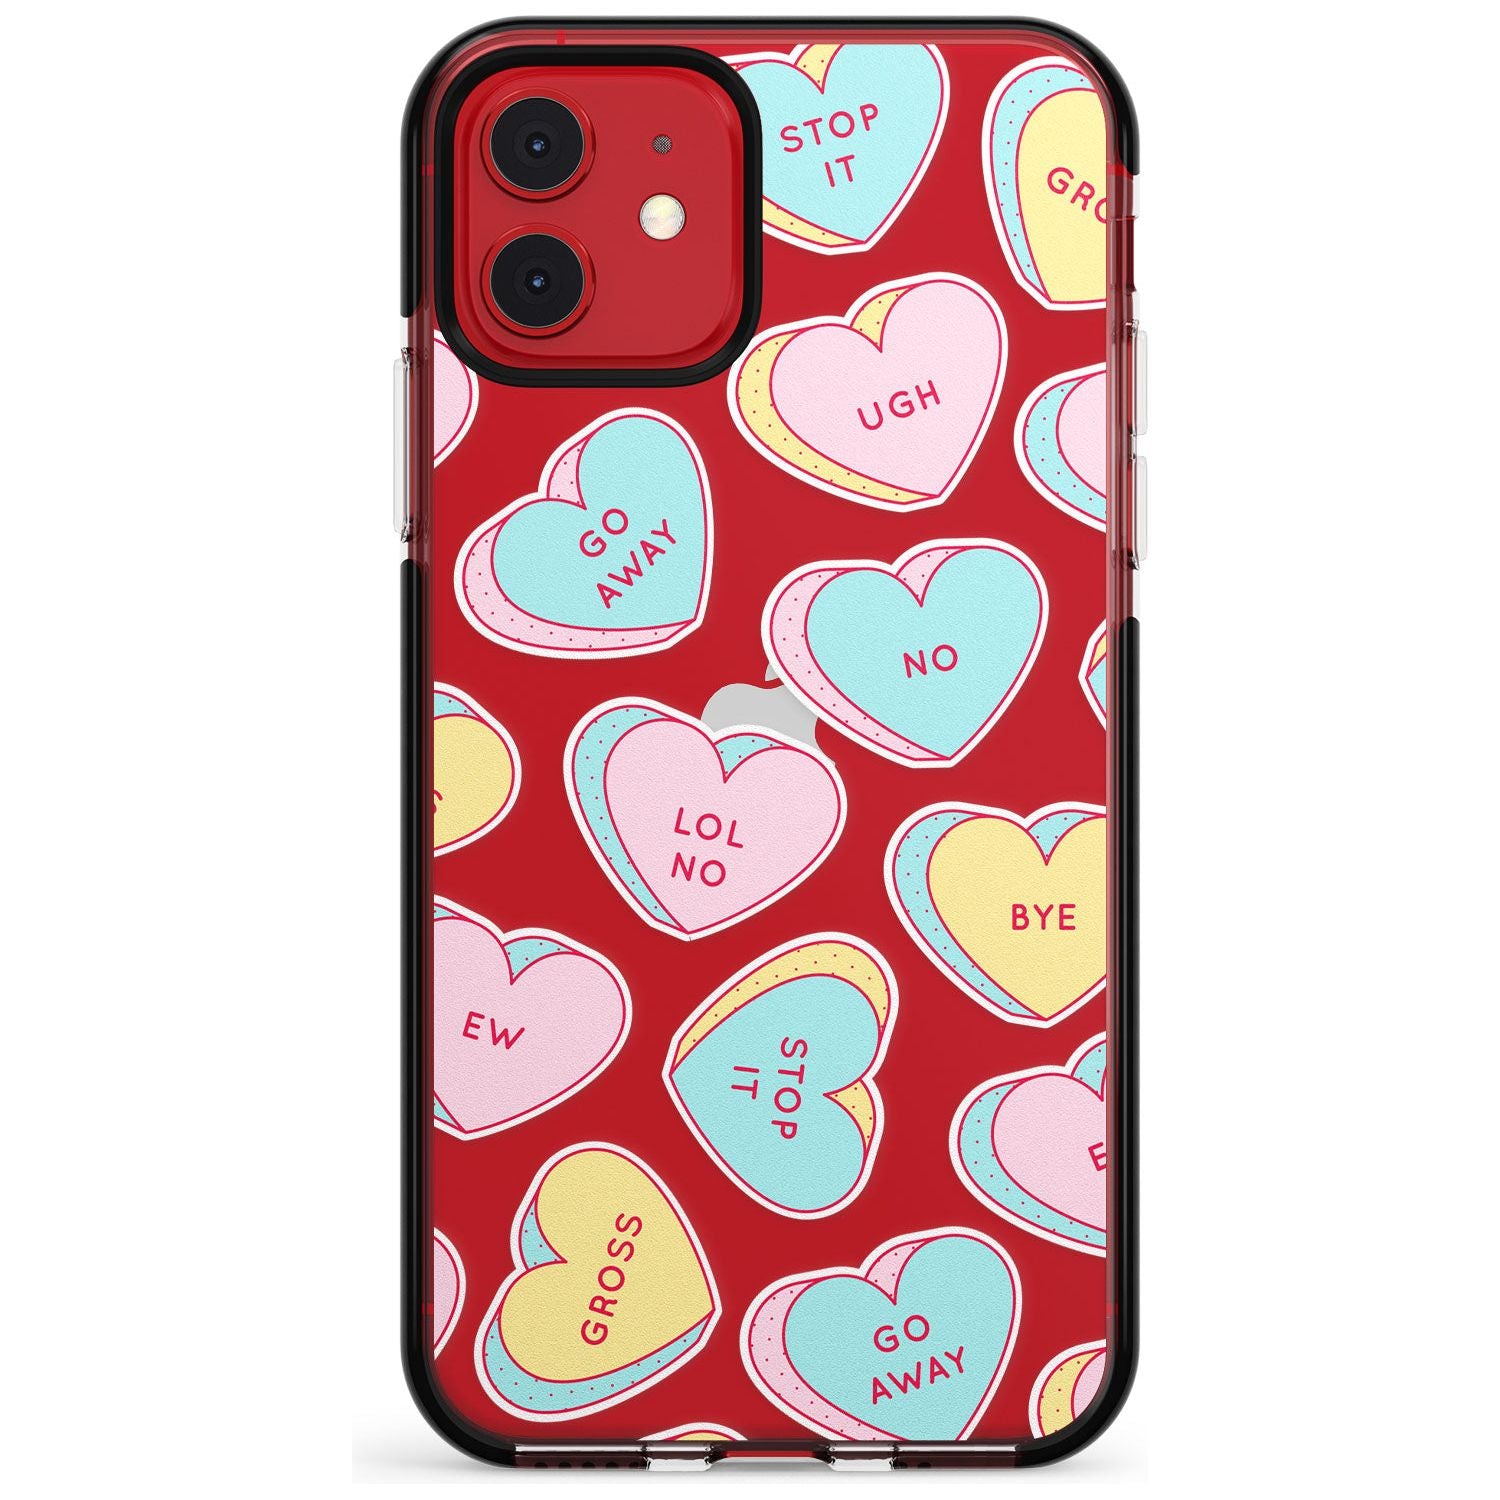 Sarcastic Love Hearts Pink Fade Impact Phone Case for iPhone 11 Pro Max